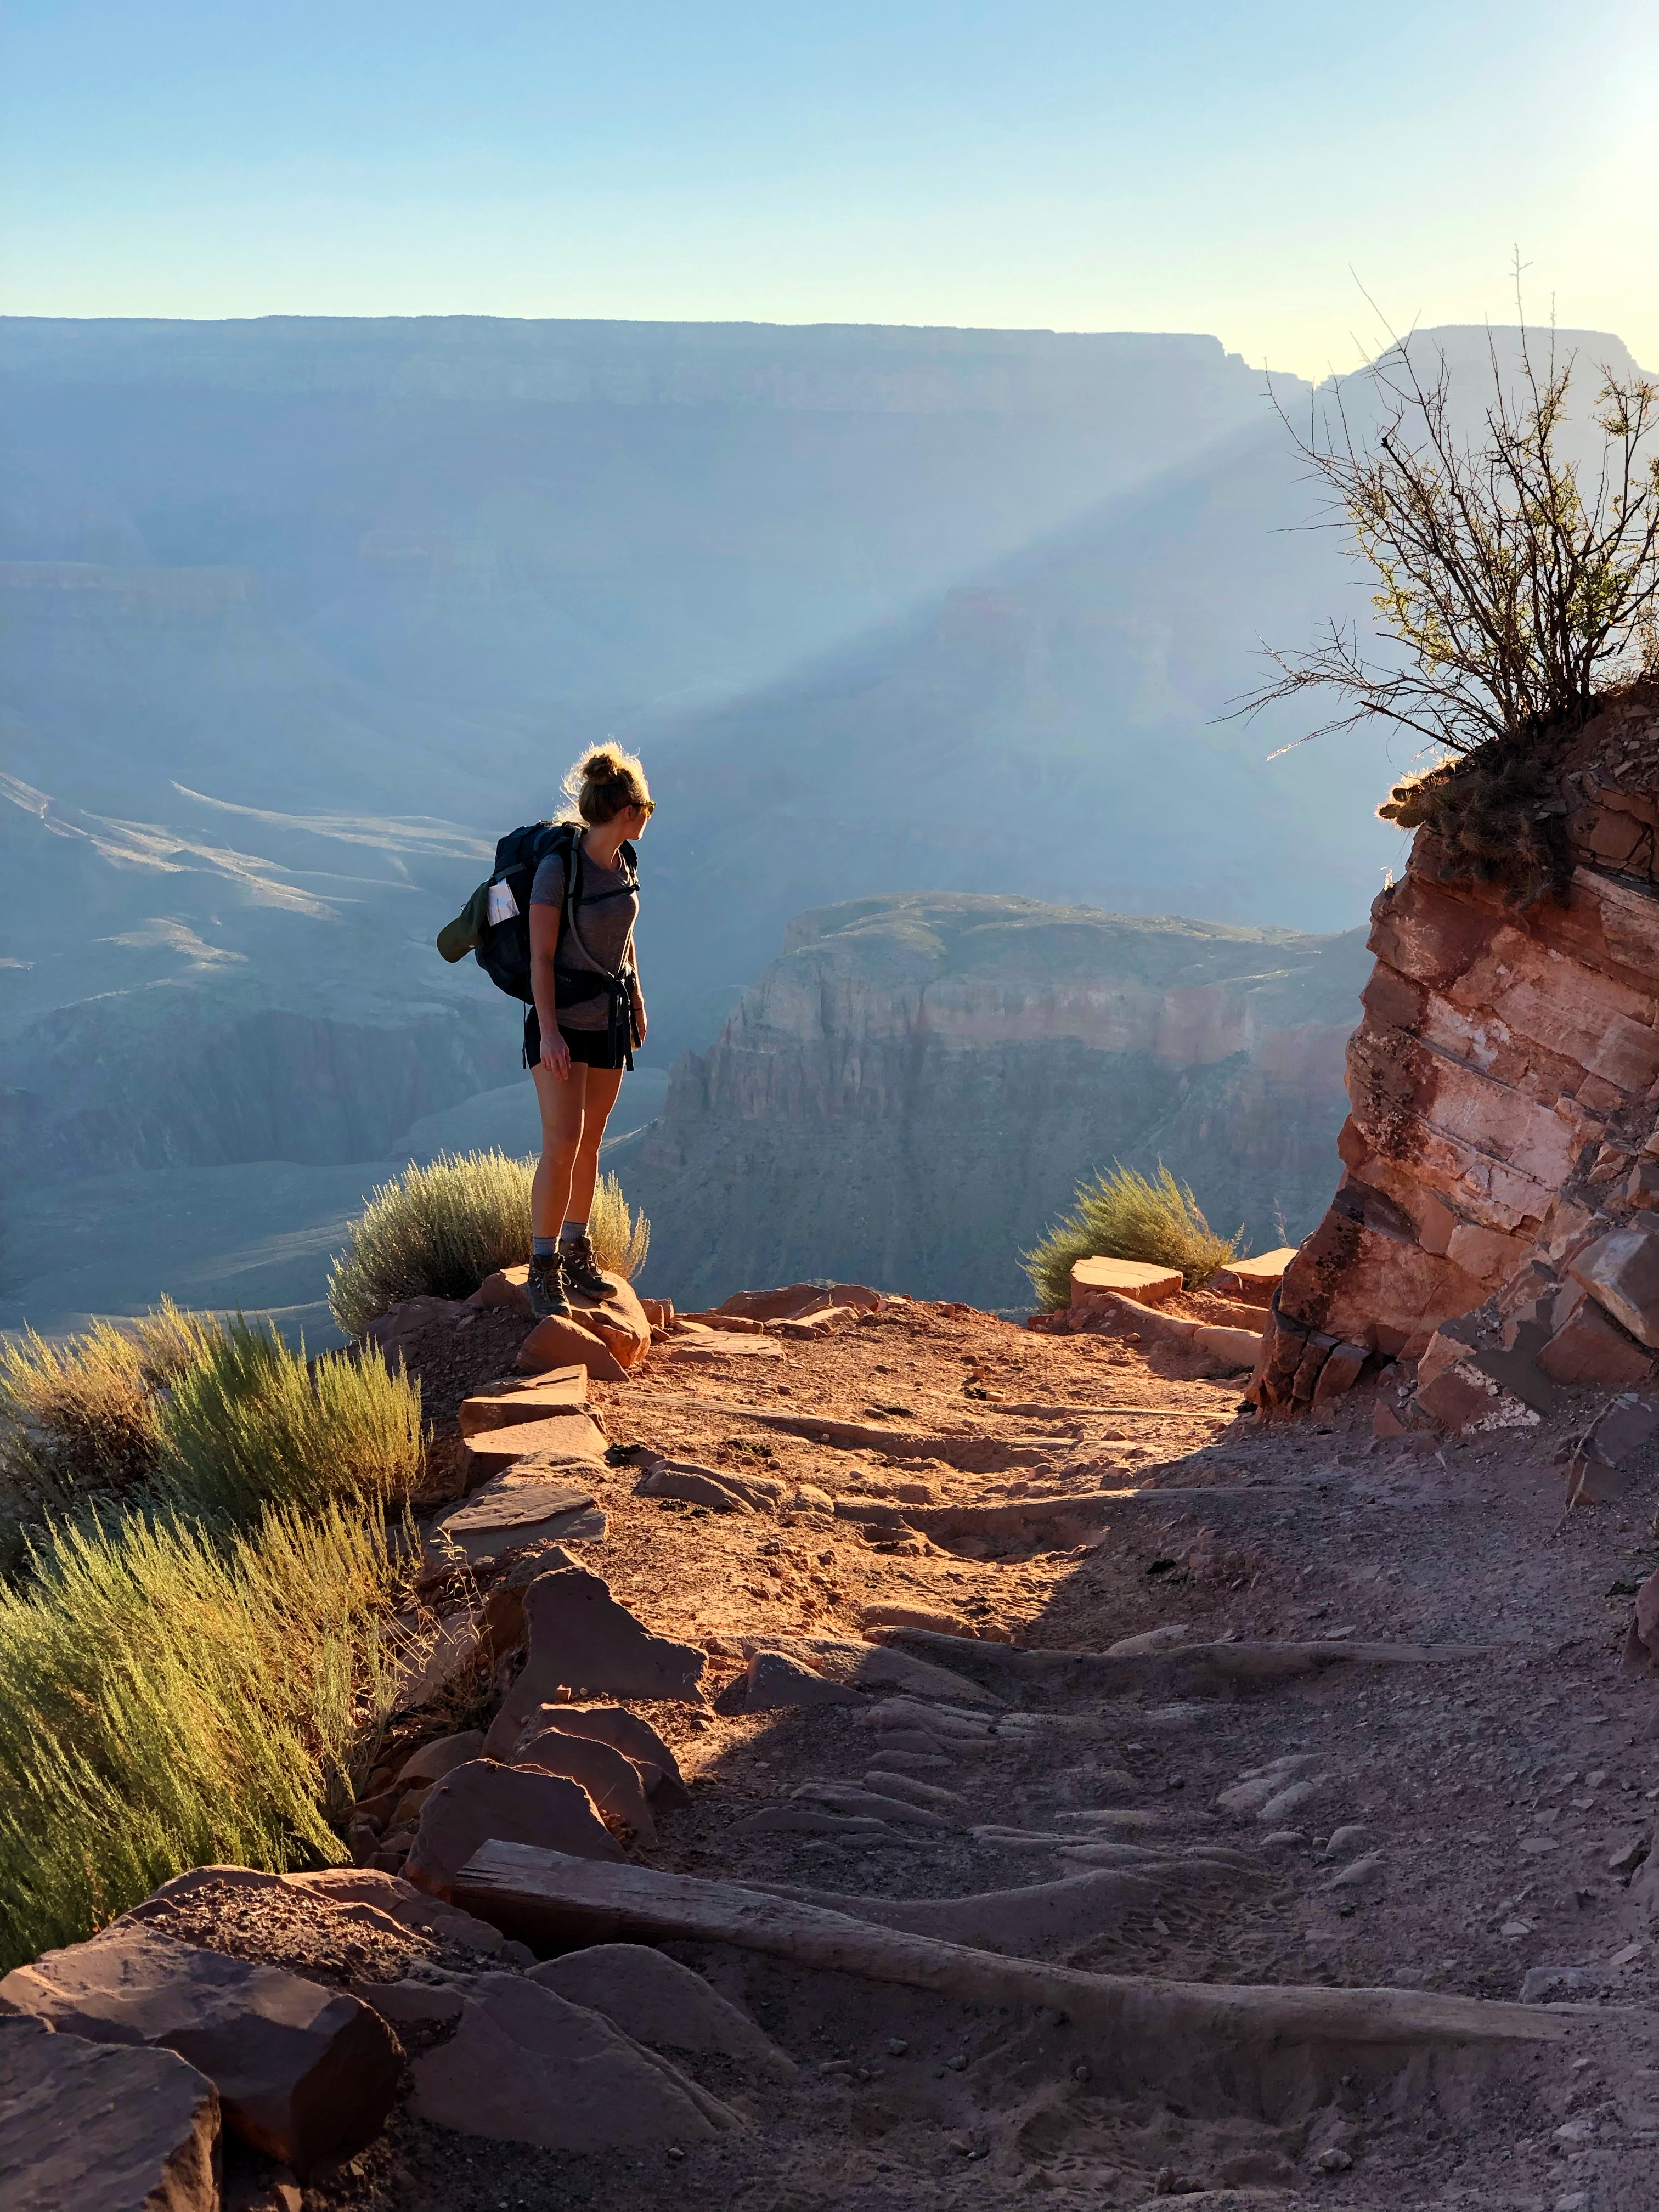 Woman with a backpack stopping on the hiking trail admiring the view.